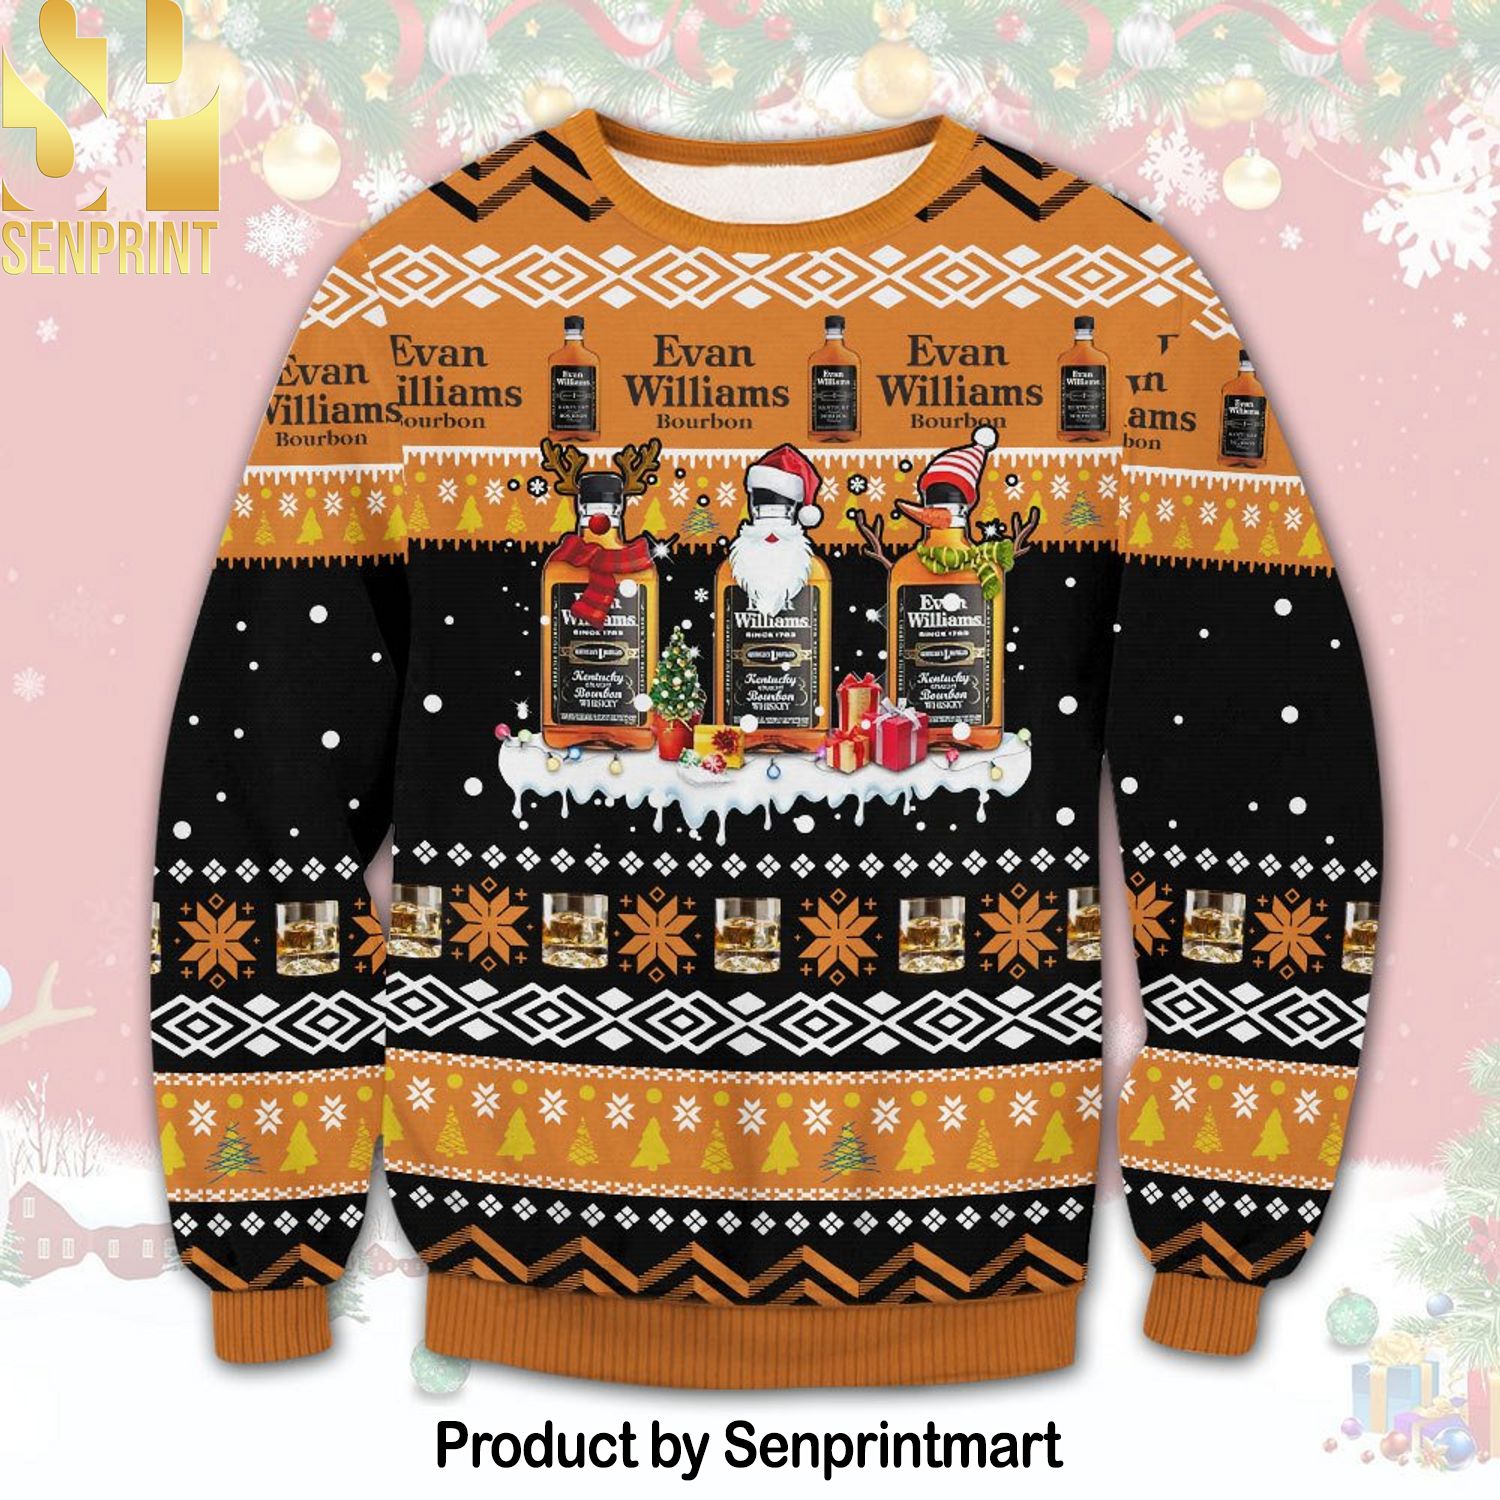 Evan Williams Bourbon For Christmas Gifts Ugly Christmas Wool Knitted Sweater